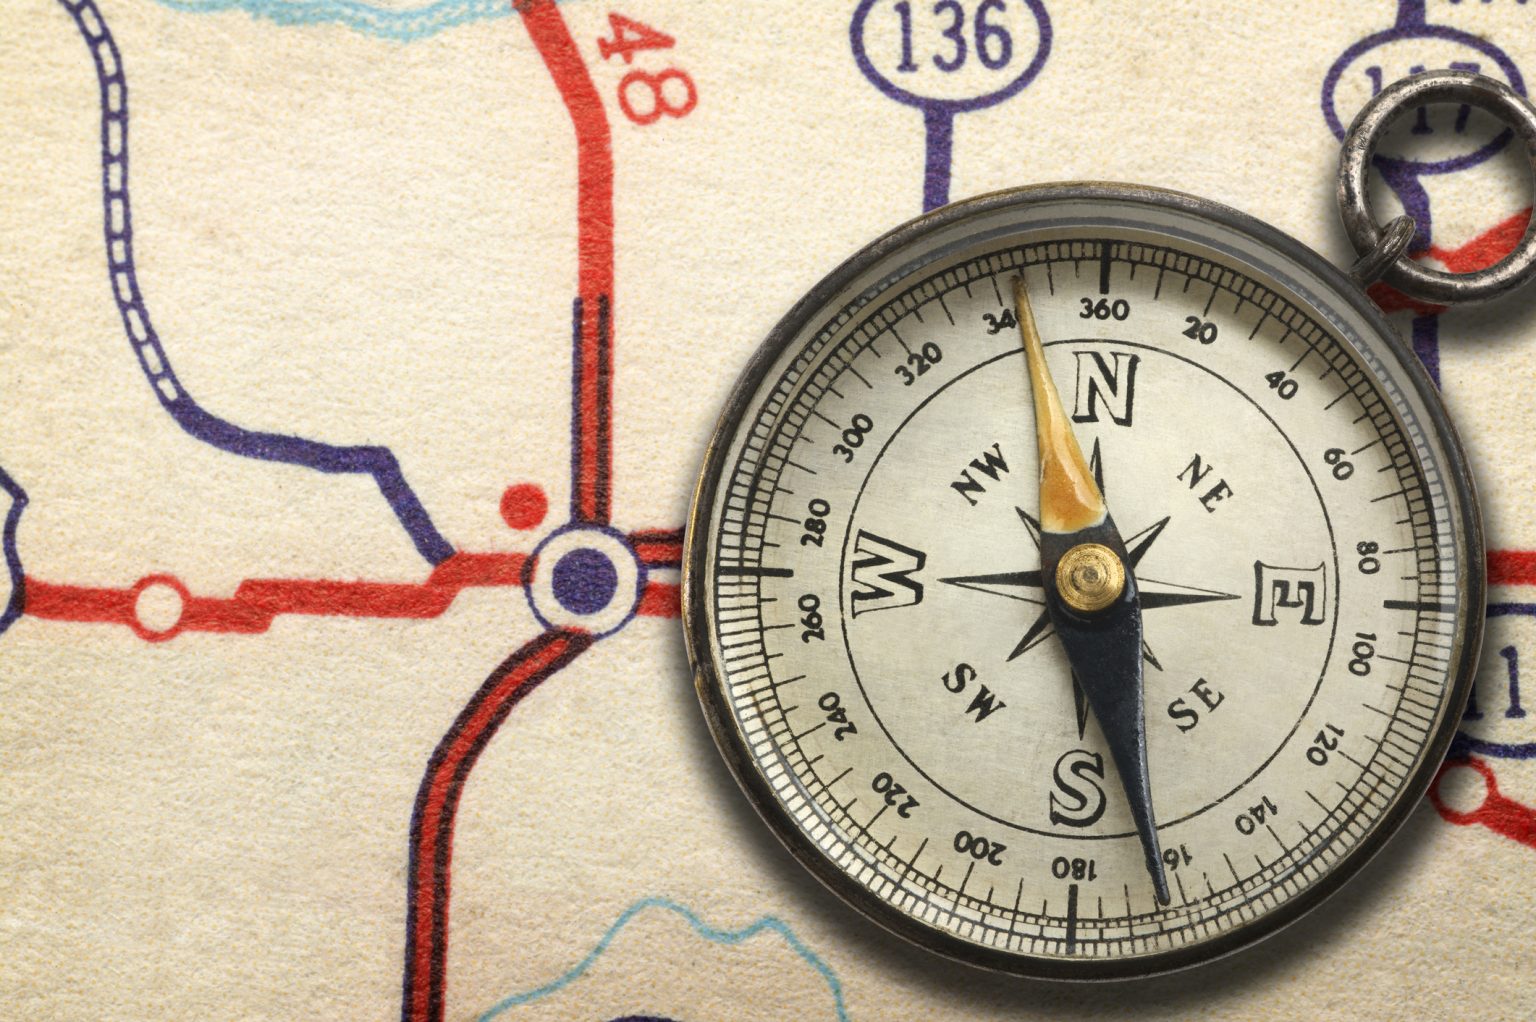 Compass sitting on top of road map showing highway junction